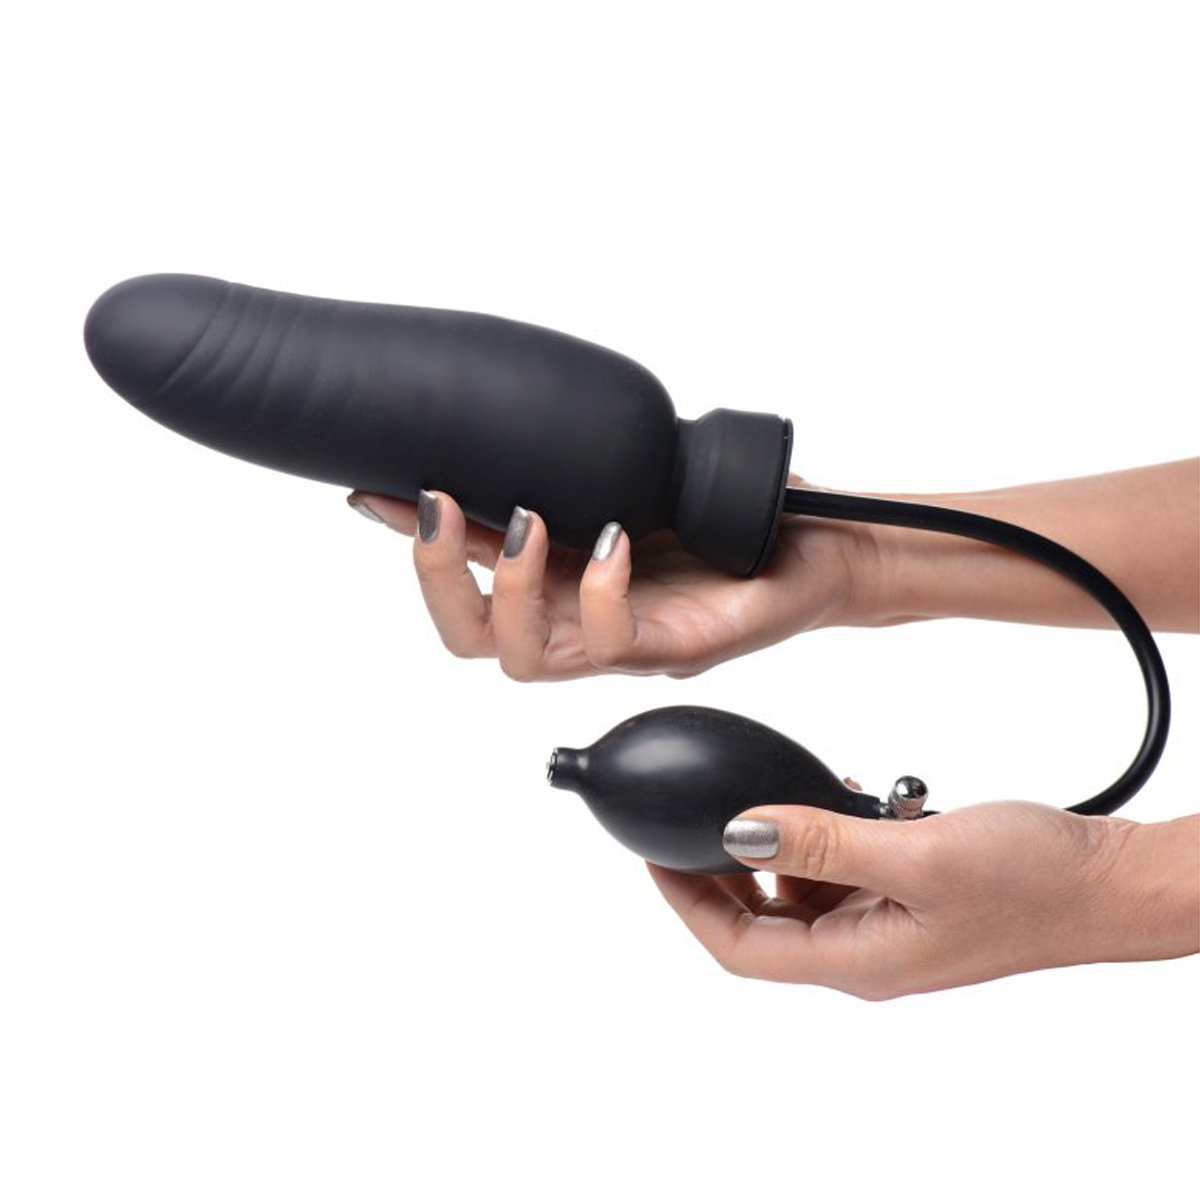 Dick-Spand-Inflatable-Silicone-Dildo-118-XR-AG554-4